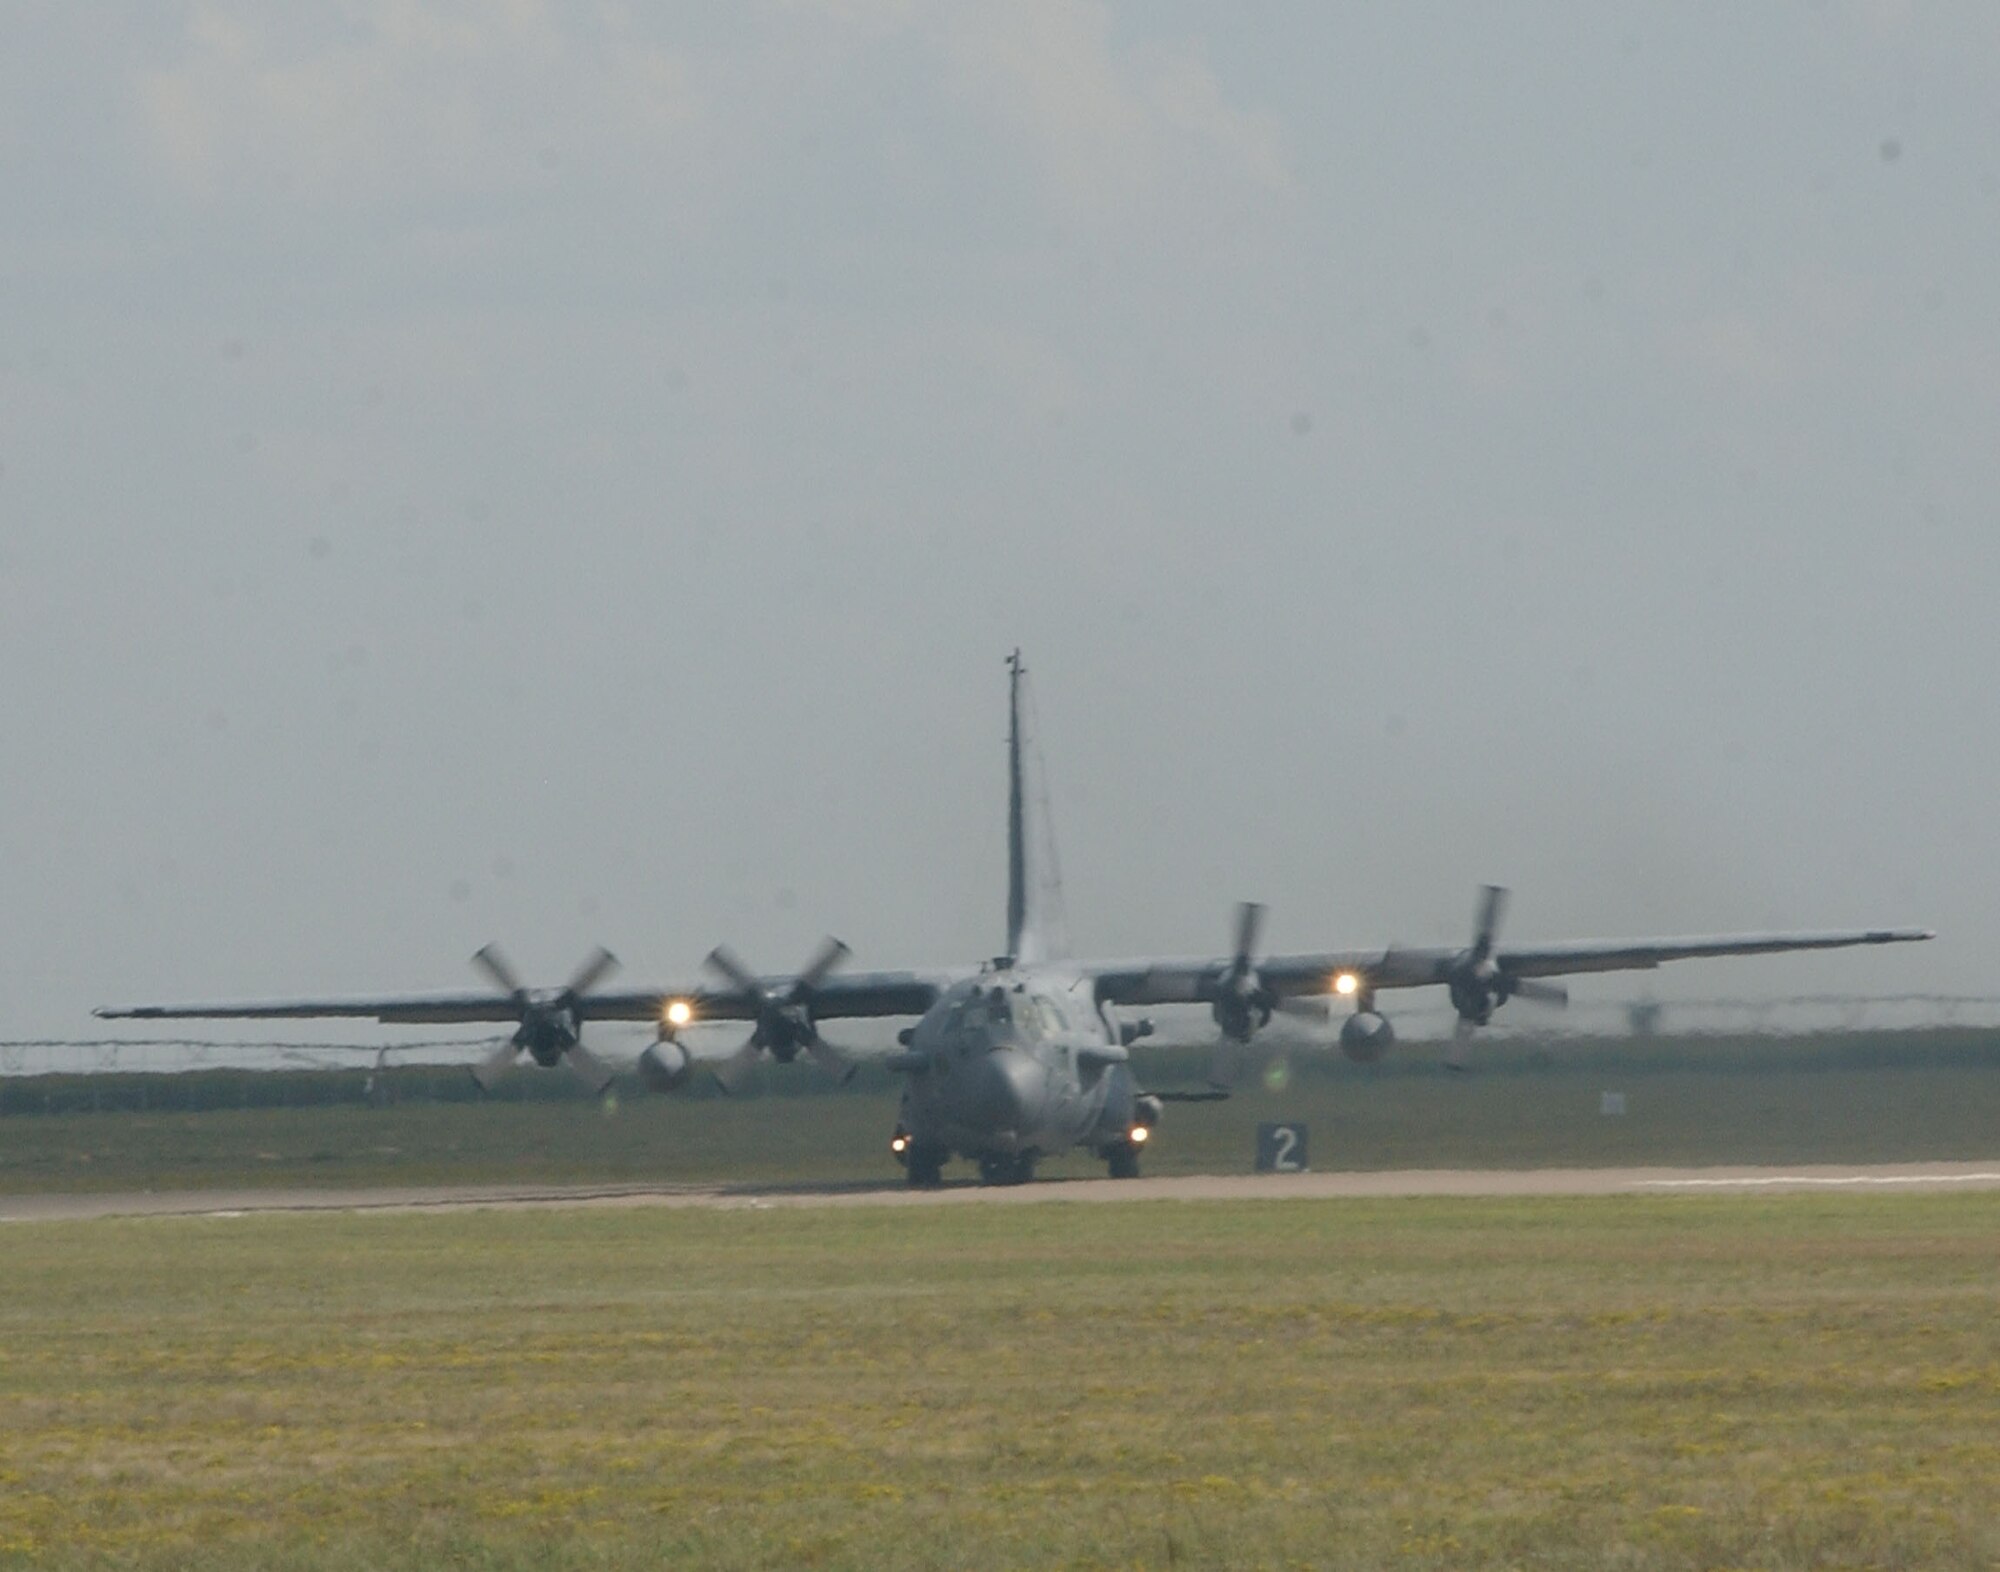 CANNON AIR FORCE BASE, N.M. -- An AC-130H Spectre gunship turns around after landing at Cannon Air Force Base September 29. Air Force Special Operations Command assumed command of Cannon in a change-of-command ceremony Oct. 1. (U.S. Air Force photo by Airman Elliott Sprehe)                               